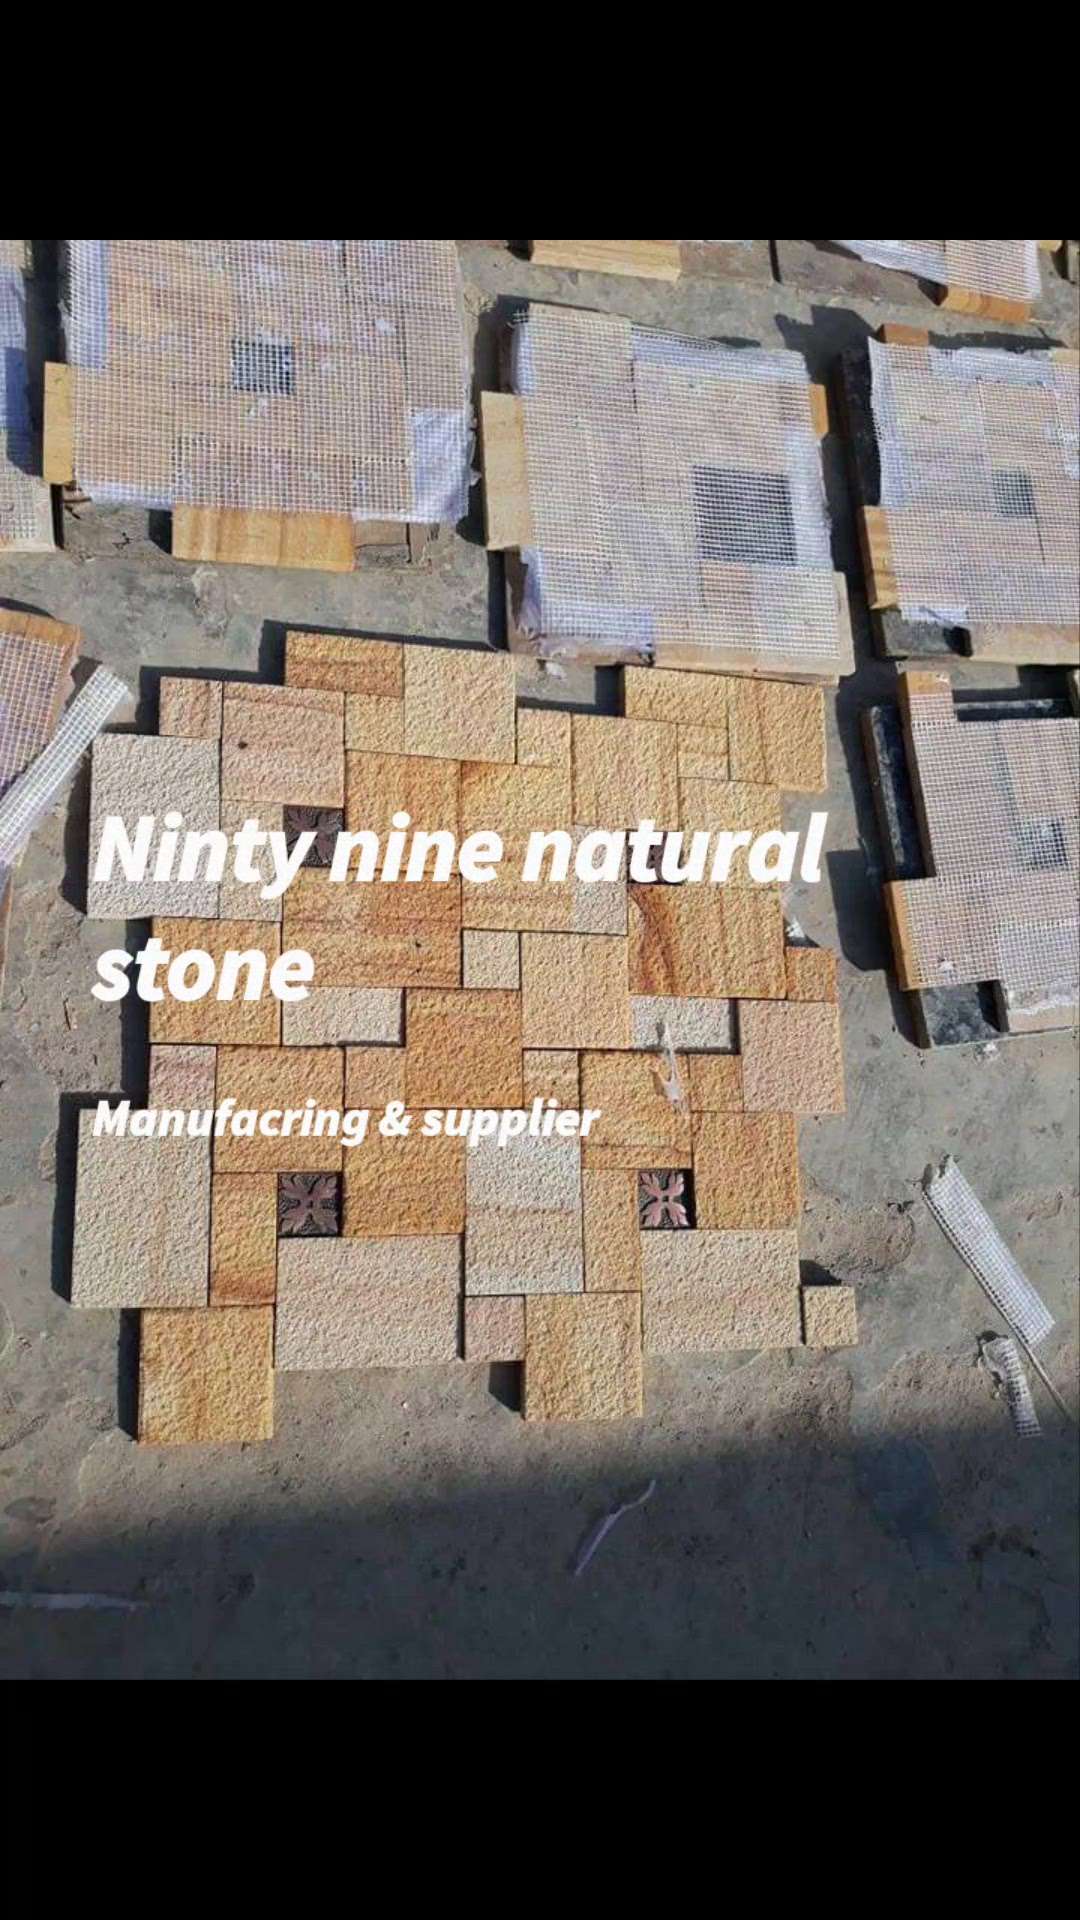 We are manufacturer and supplirs for natural stone wall cladding tiles Interior and exterior 
From jaipur rajasthan 
📞 WhatsApp 9256005359